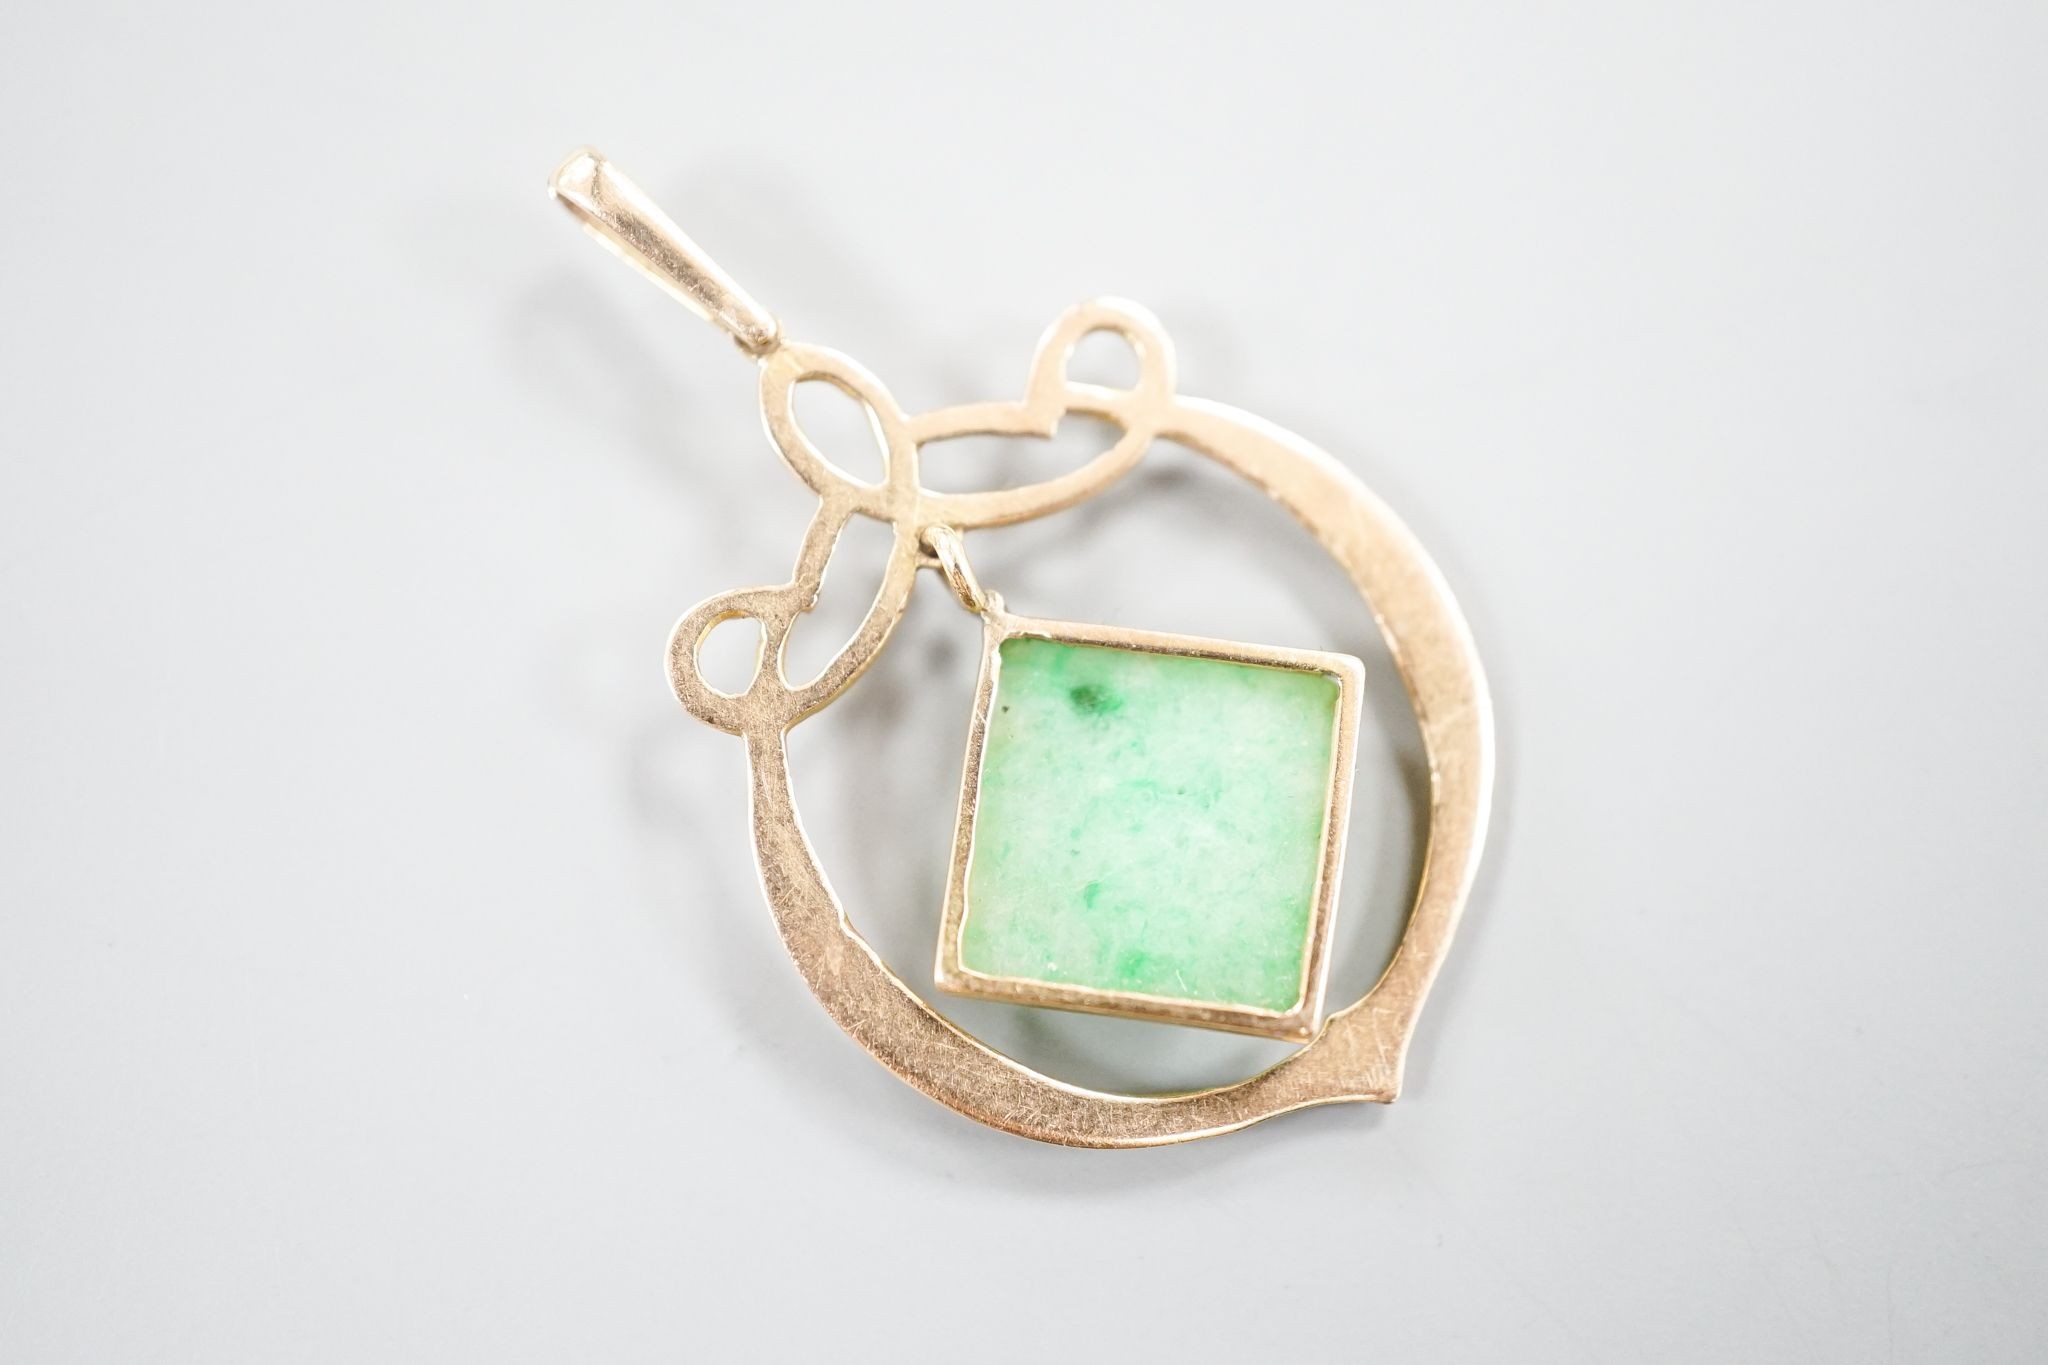 A yellow metal mounted jade pendant, overall 35mm, gross 2.6 grams.